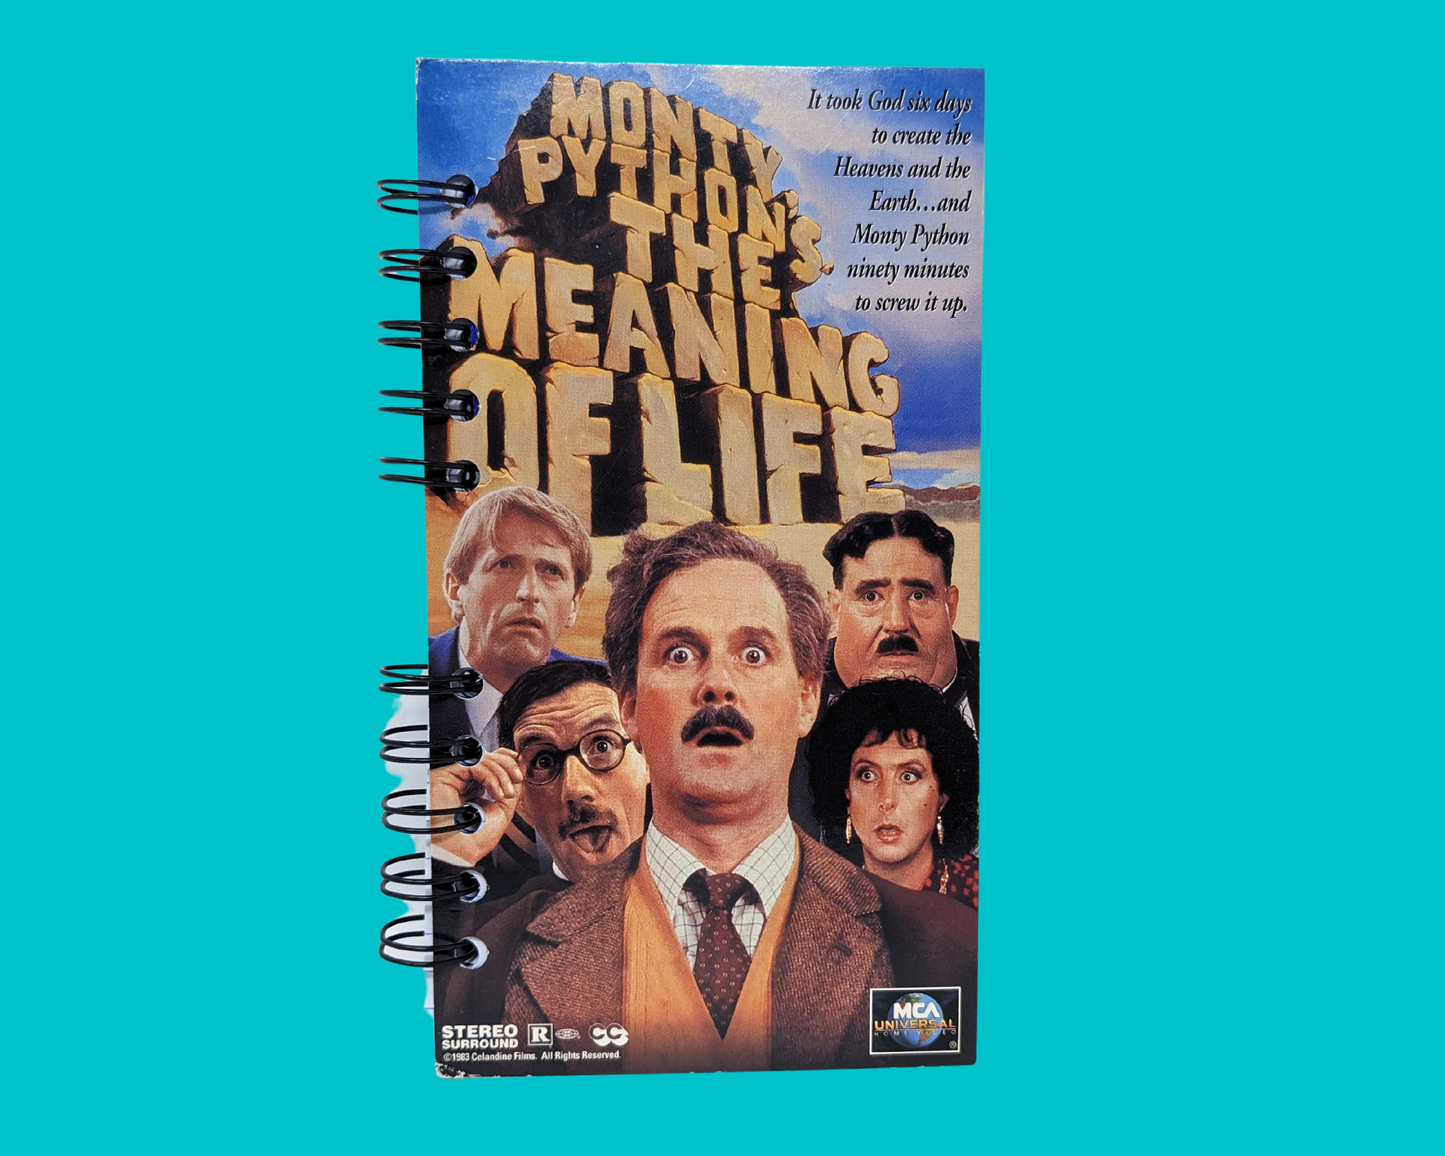 Monty Python's The Meaning Of Life VHS Movie Notebook